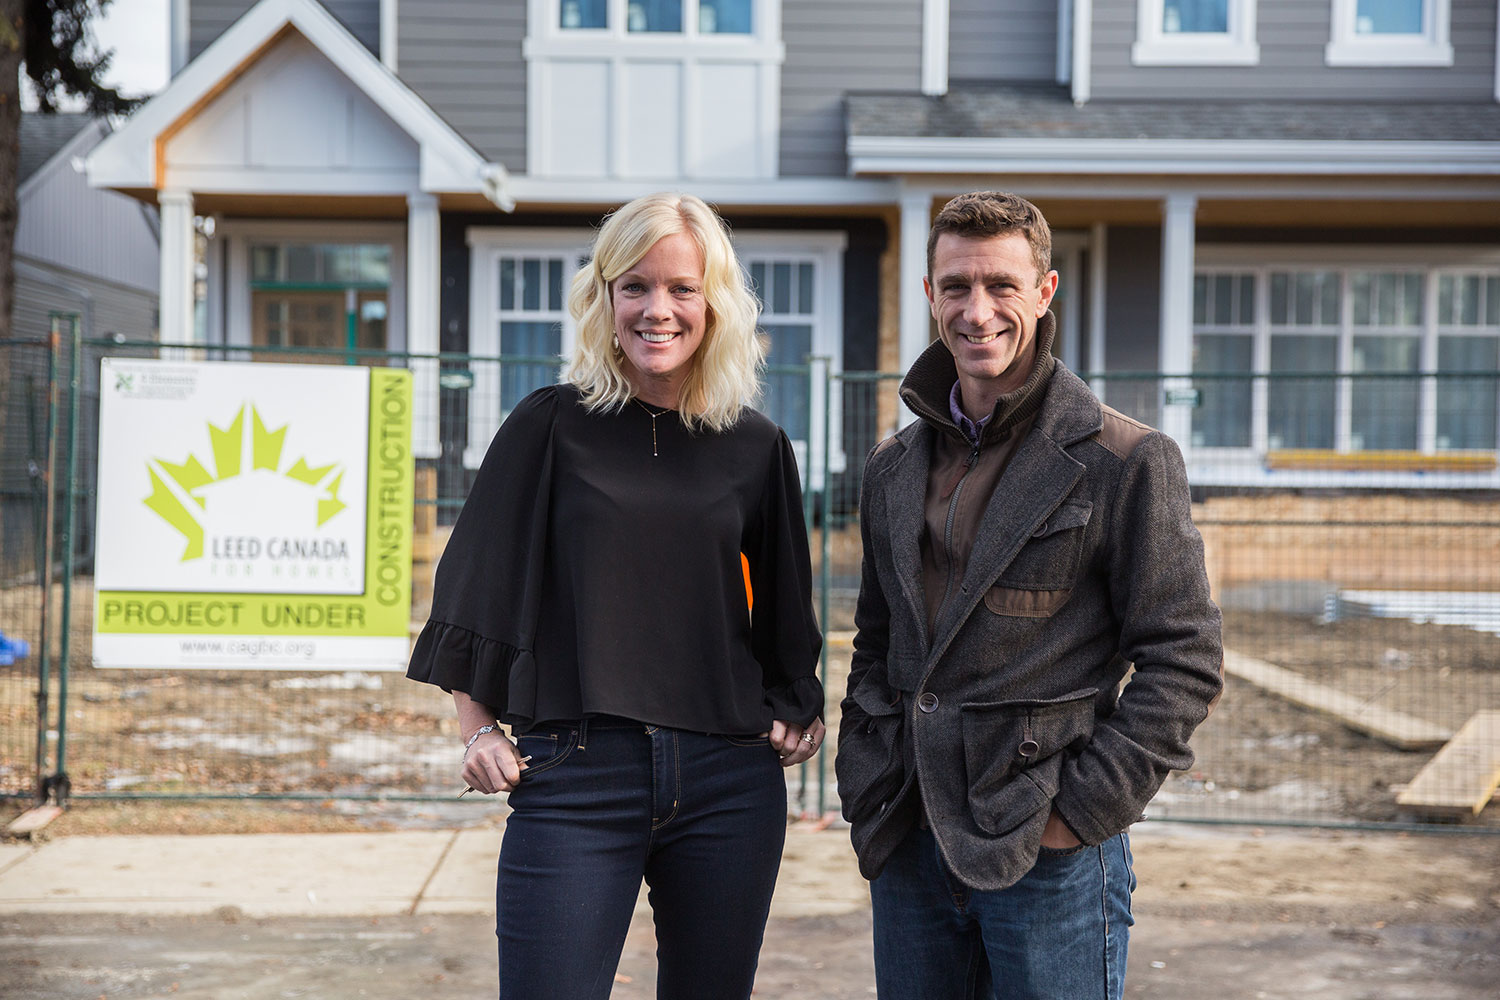 Sharon van de Burgt (left) and her family will be moving into their new Killarney duplex, built by Steve Norris (right) of Steve Norris and Partners, before Christmas. They had lived in a small bungalow on the property for 18 years before deciding to tear down and rebuild.
Adrian Shellard / For CREB®Now